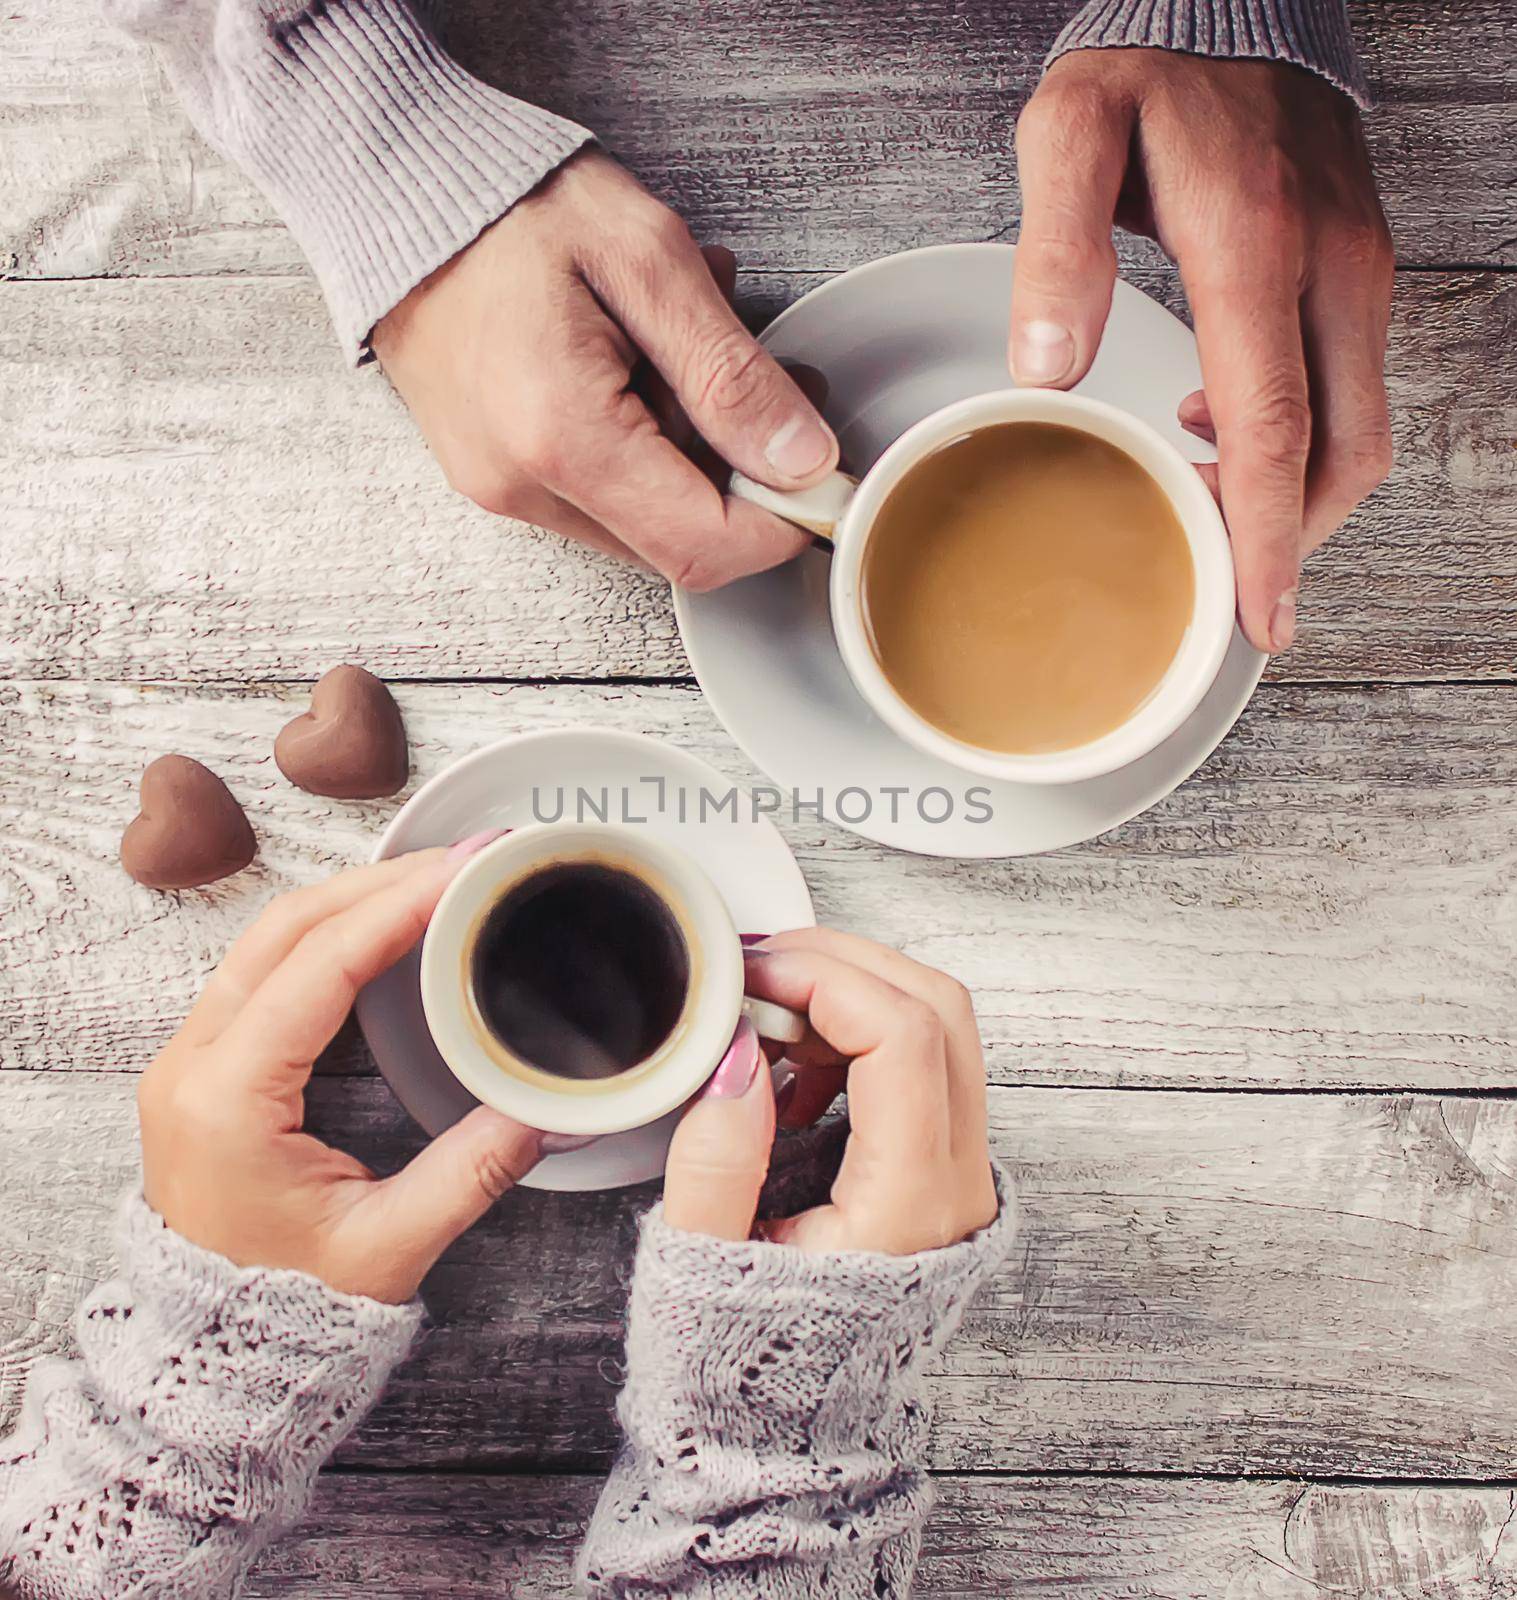 A cup of coffee. Selective focus. Couple. Drink.